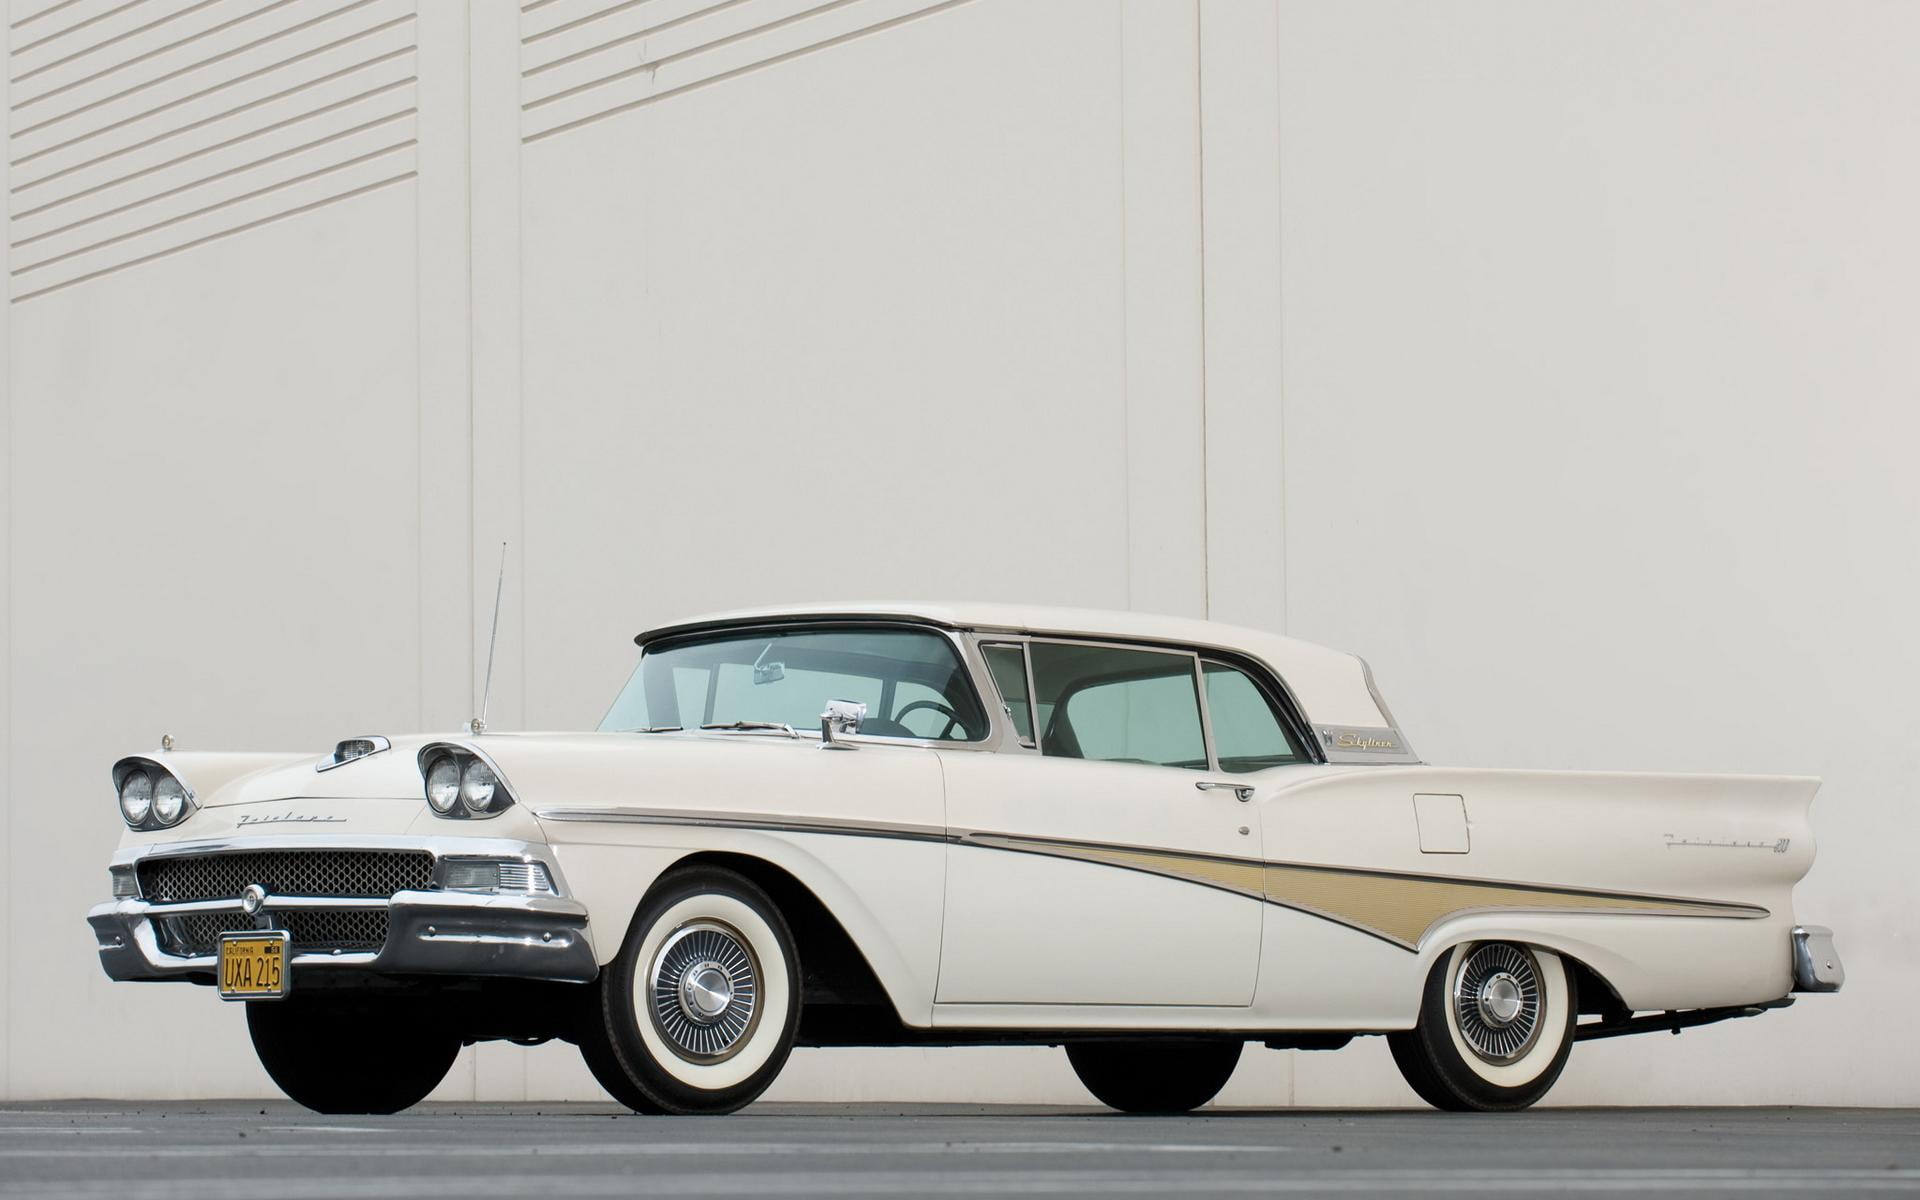 1958 Ford Fairlane 500 Skyliner, white muscle car, cars, 1920x1200